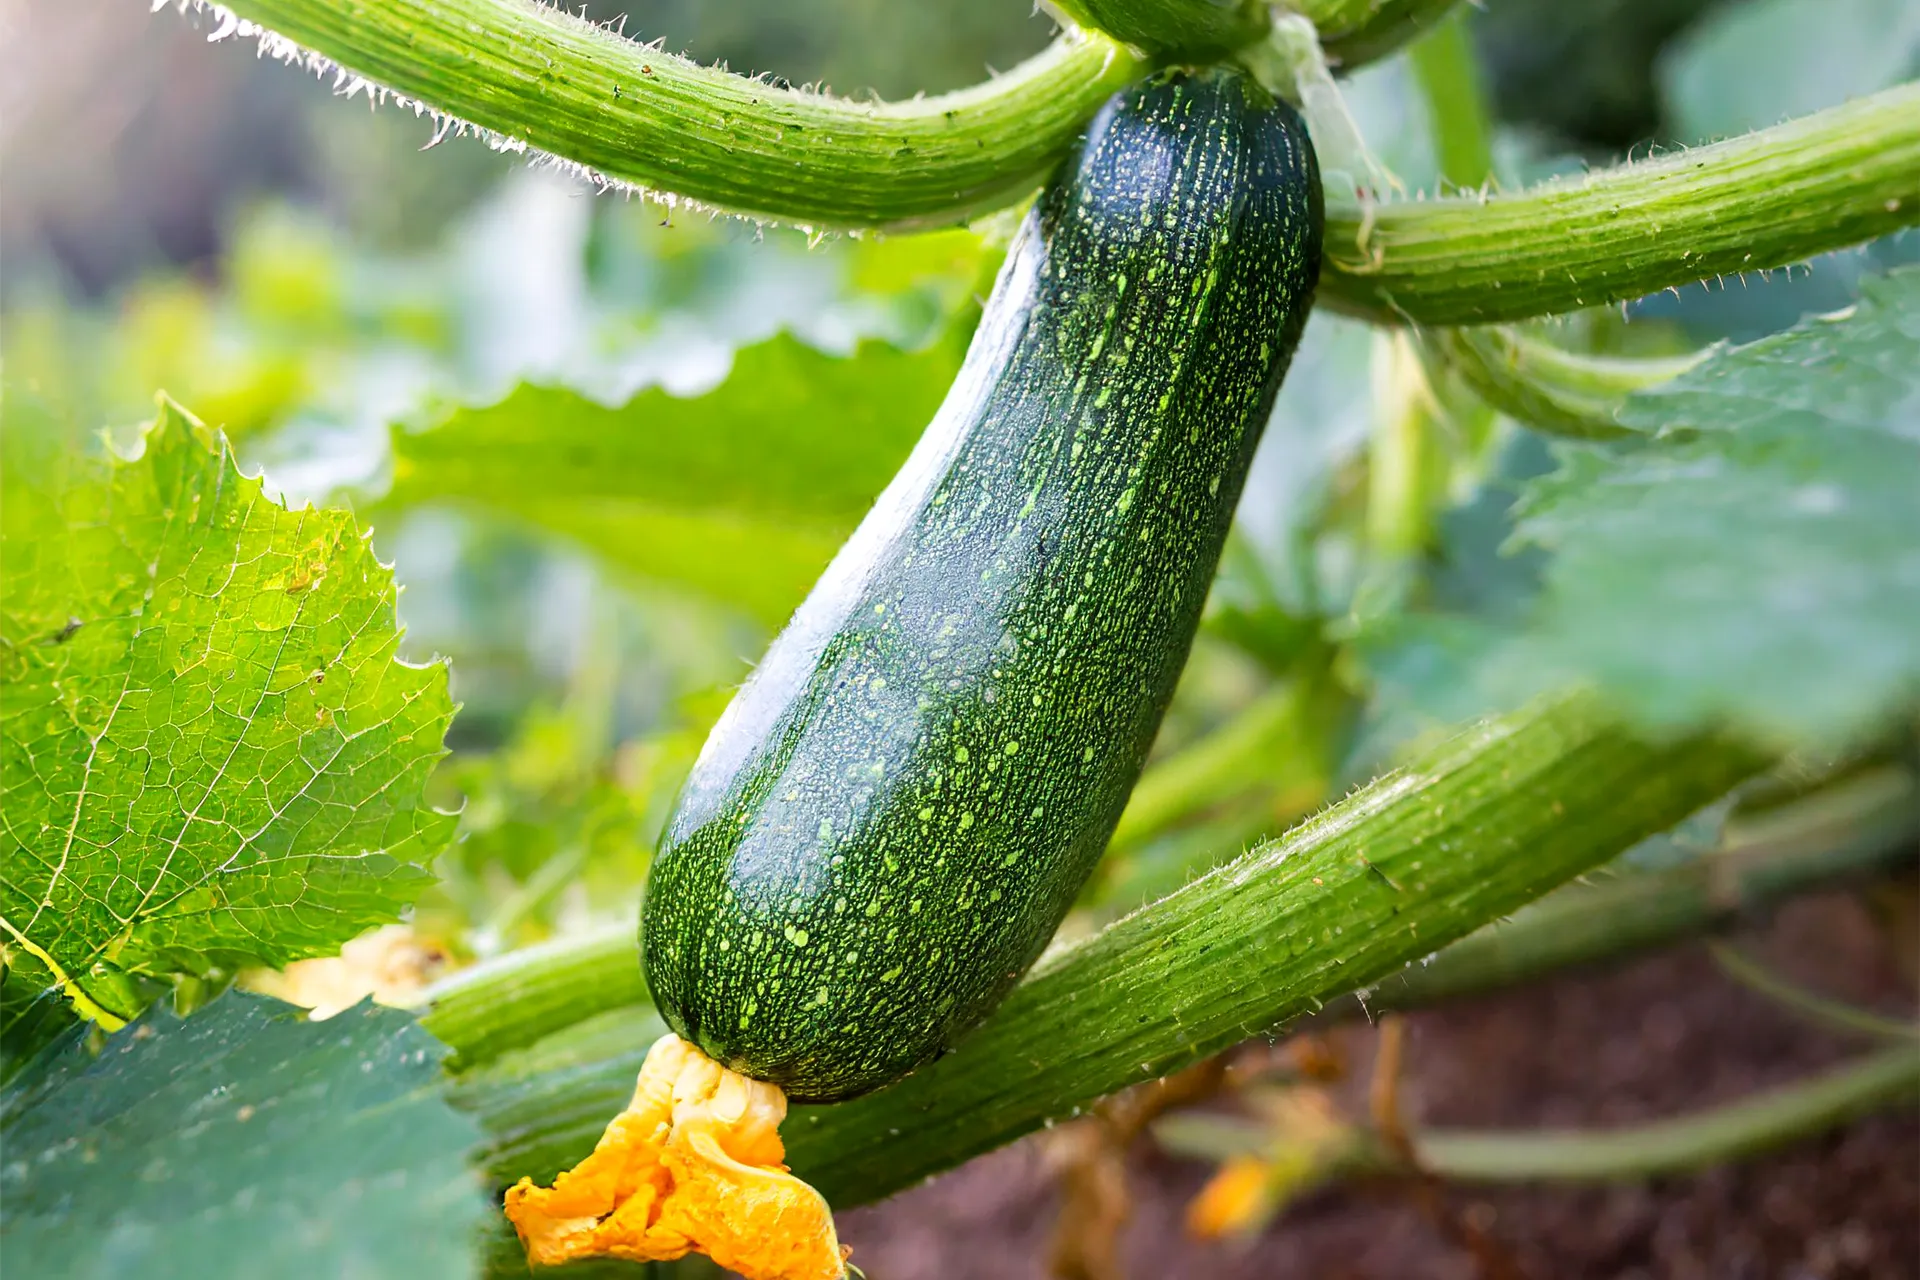 Green Zucchini growing on a zucchini plant with a zucchini flower on the end.